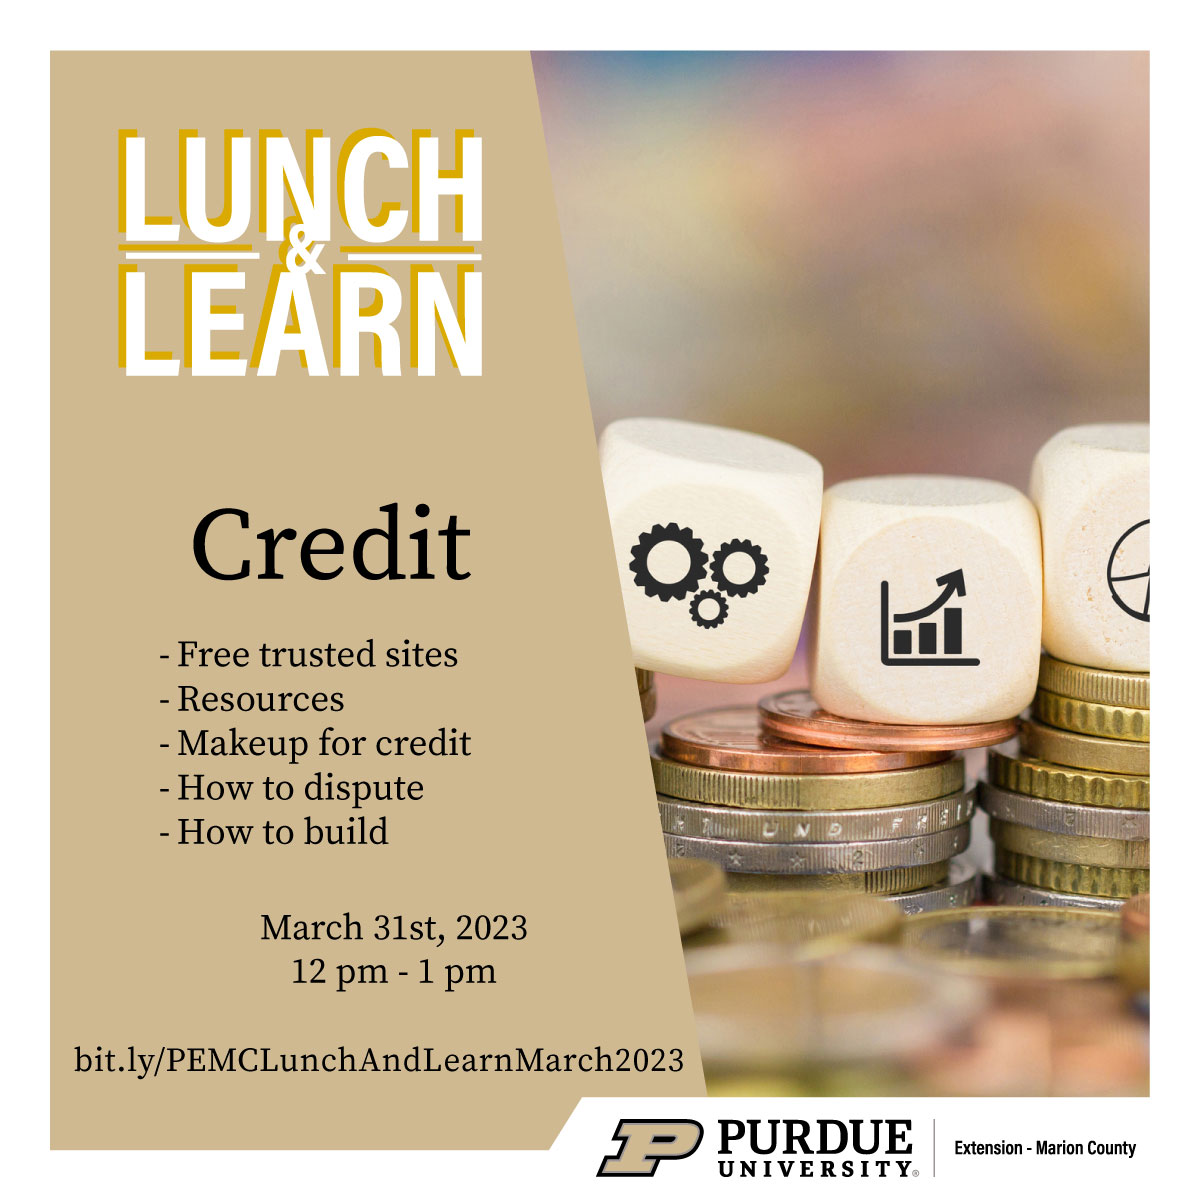 Picture of coins Lunch and Learn Credit